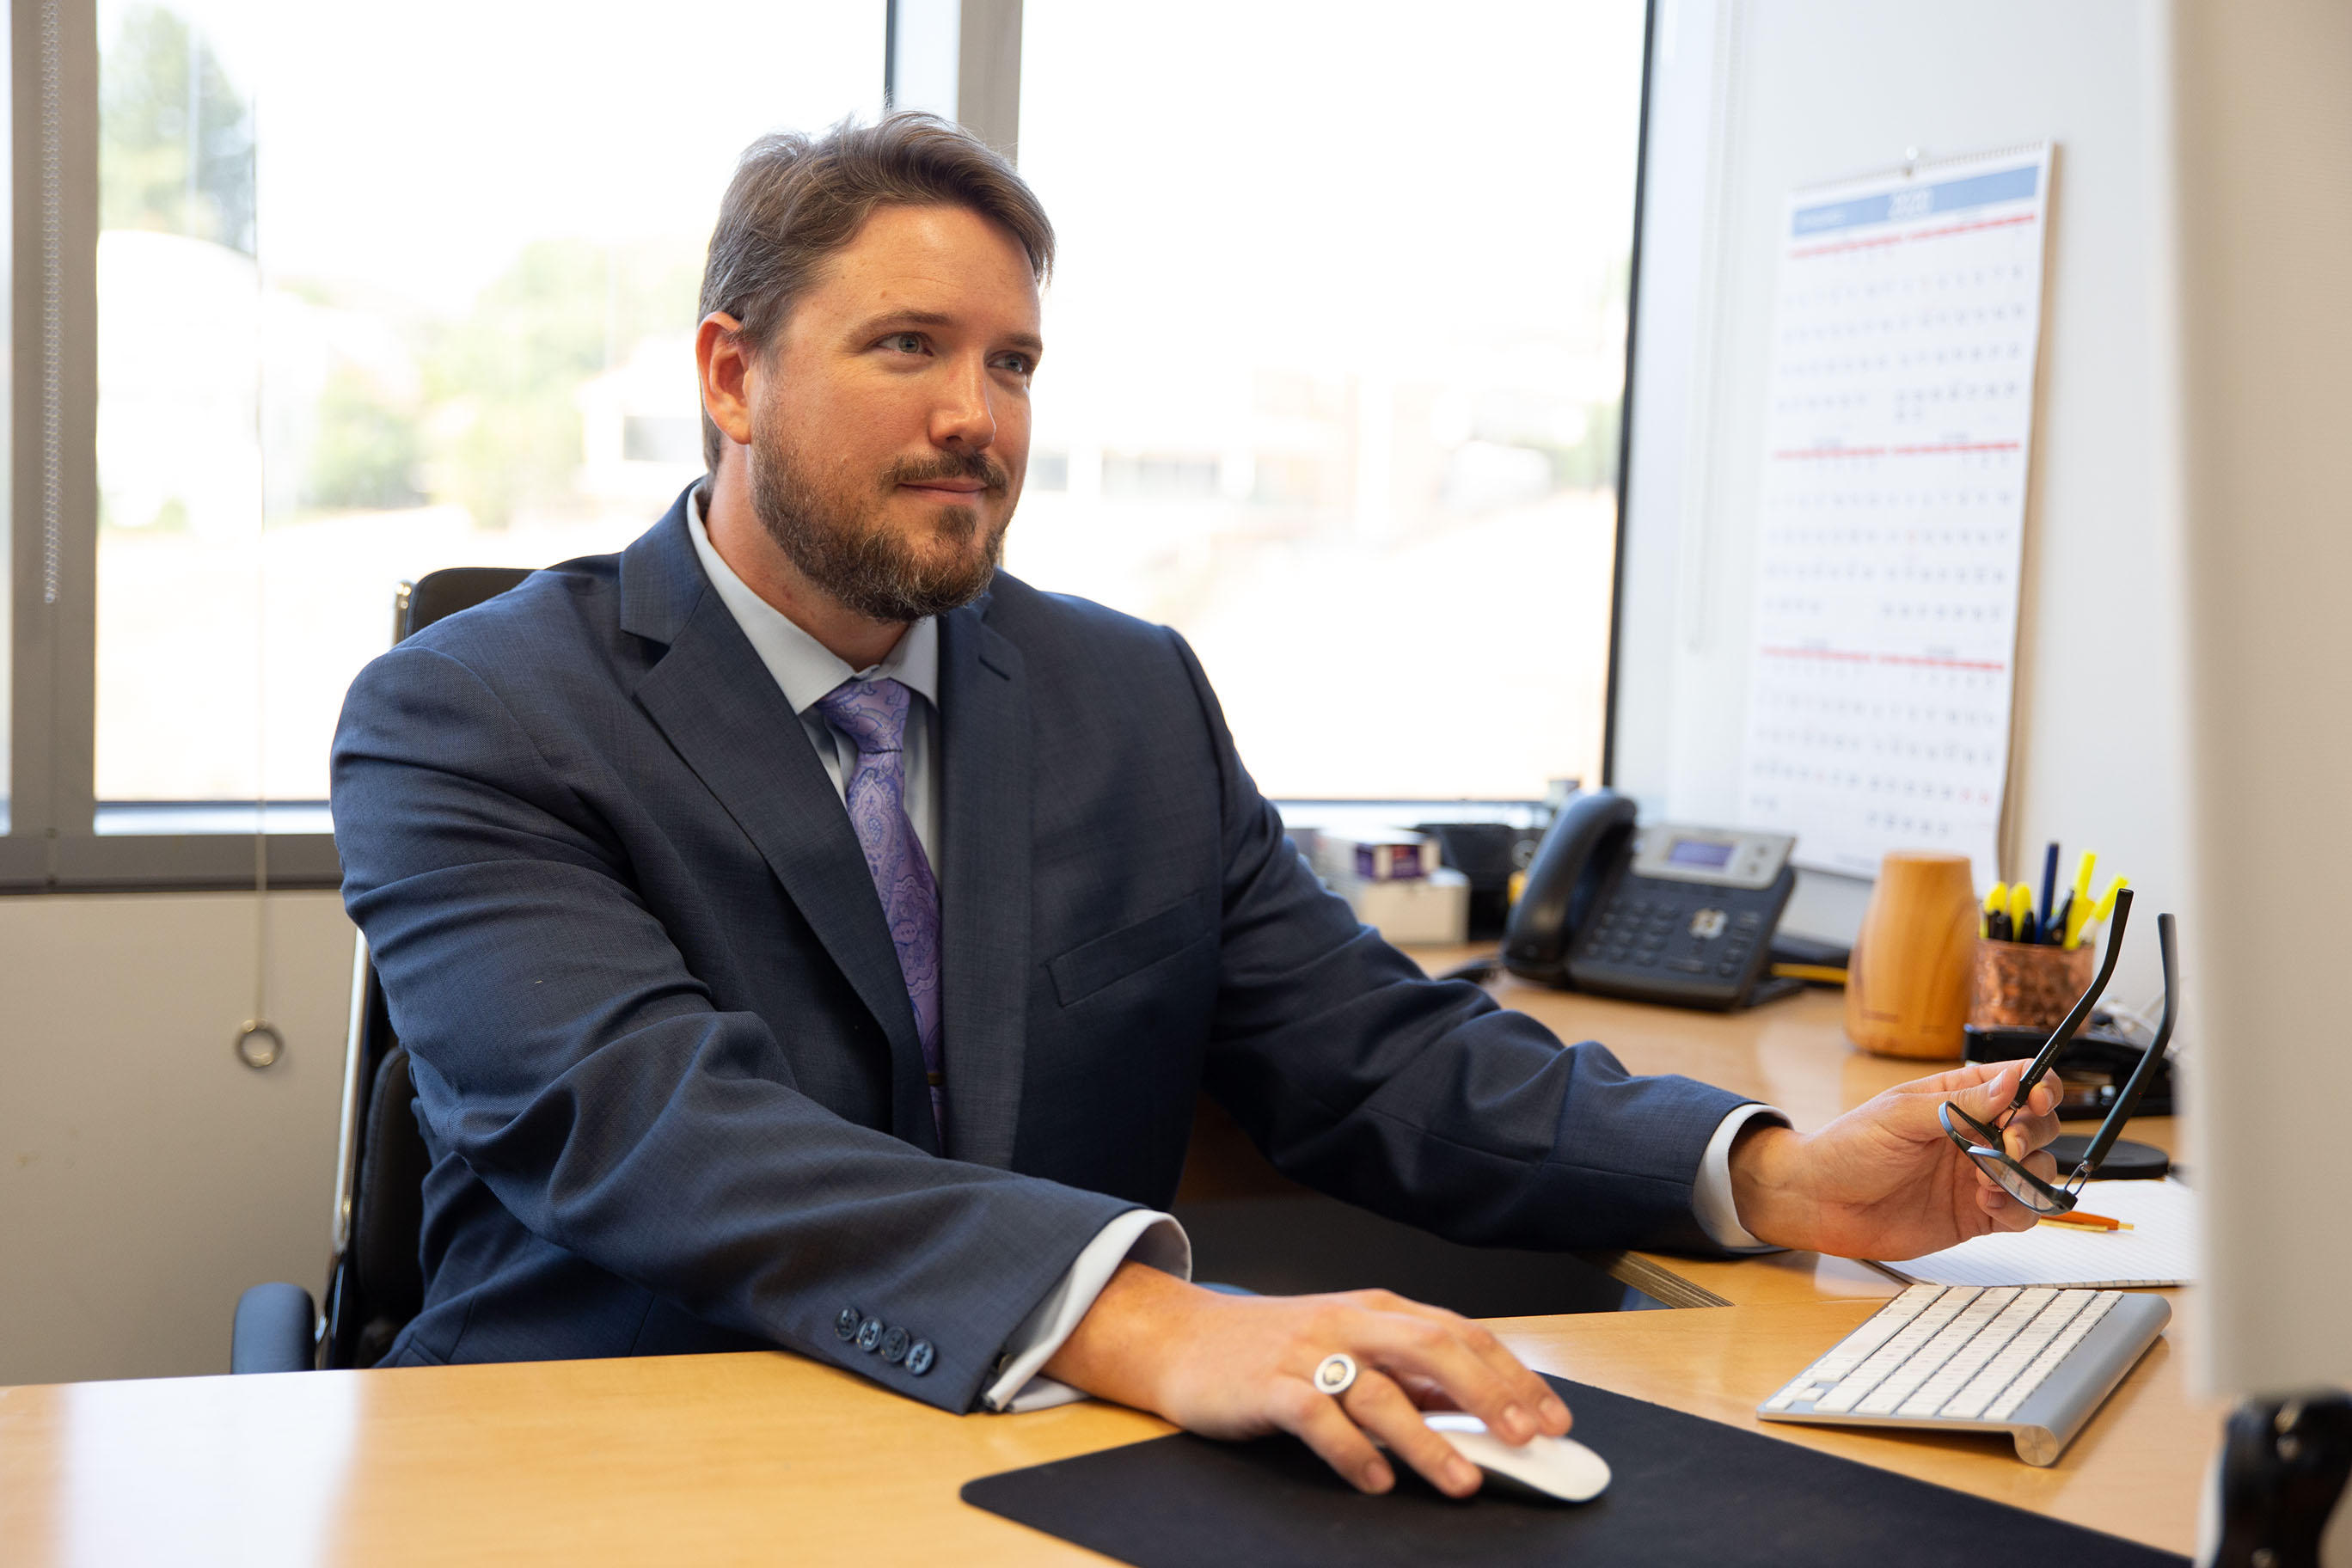 Workers' Compensation Attorney Joseph Richards Working At His Desk